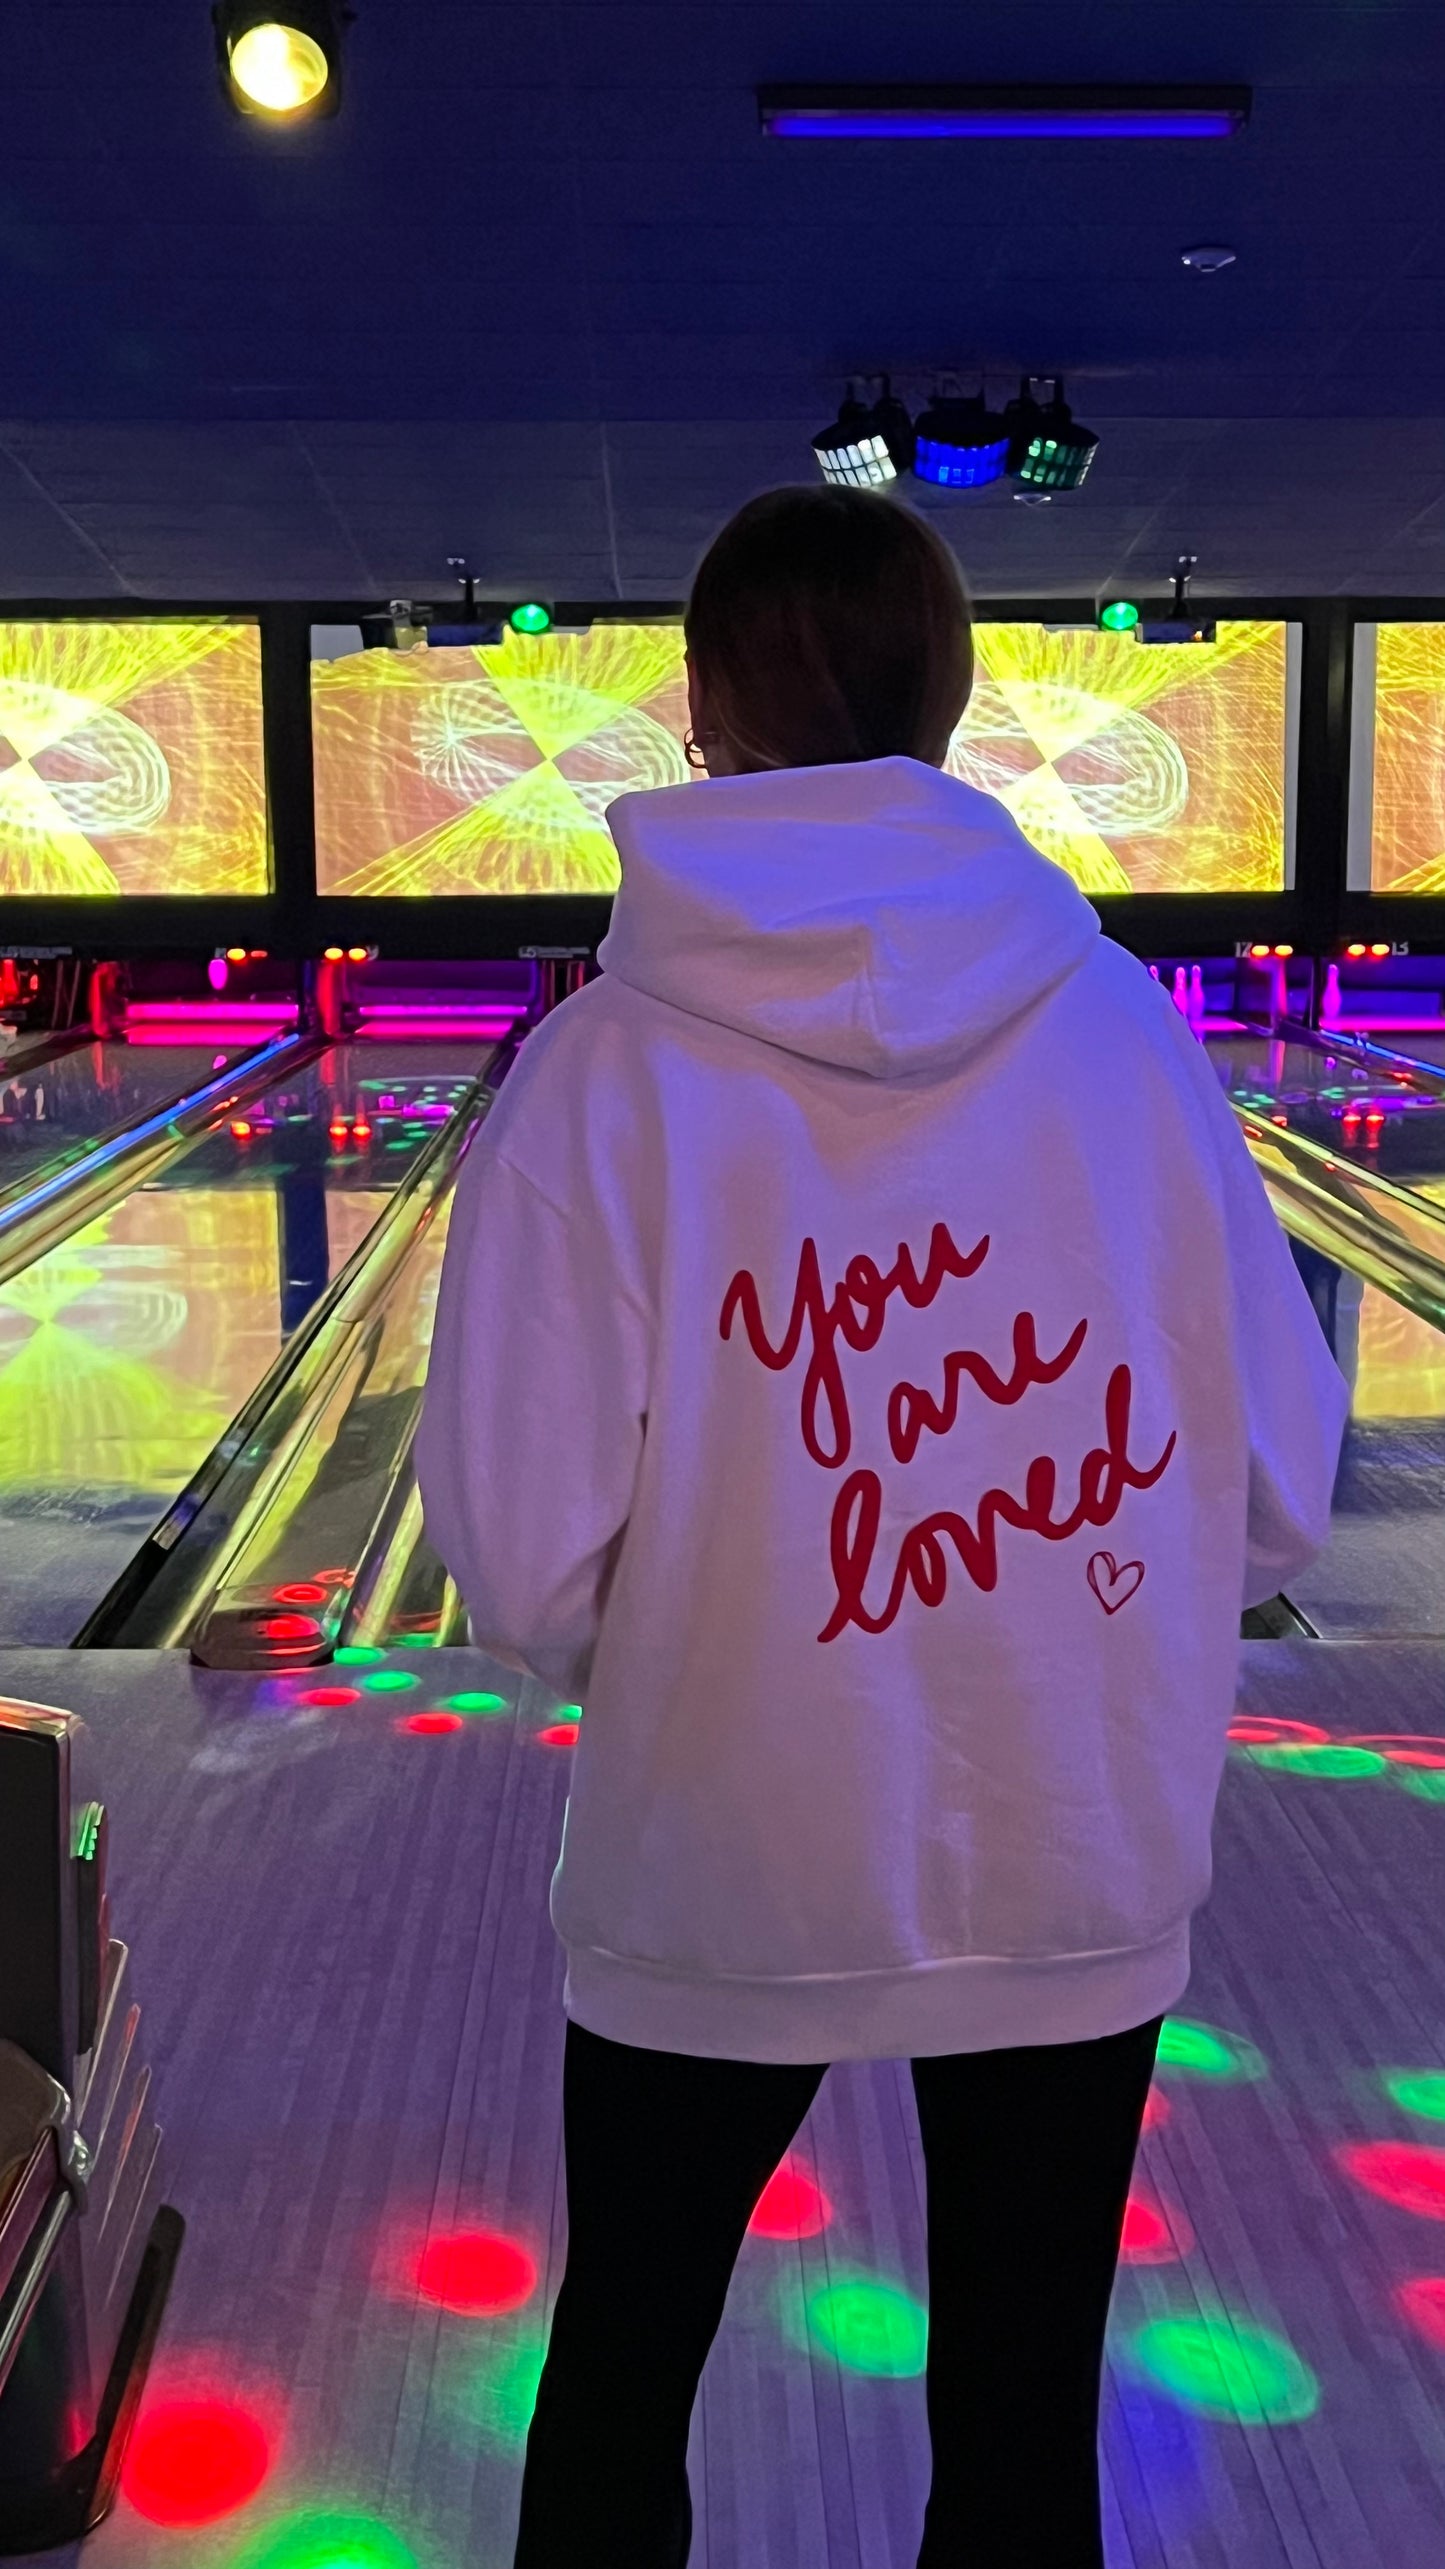 You are Loved Hoodie